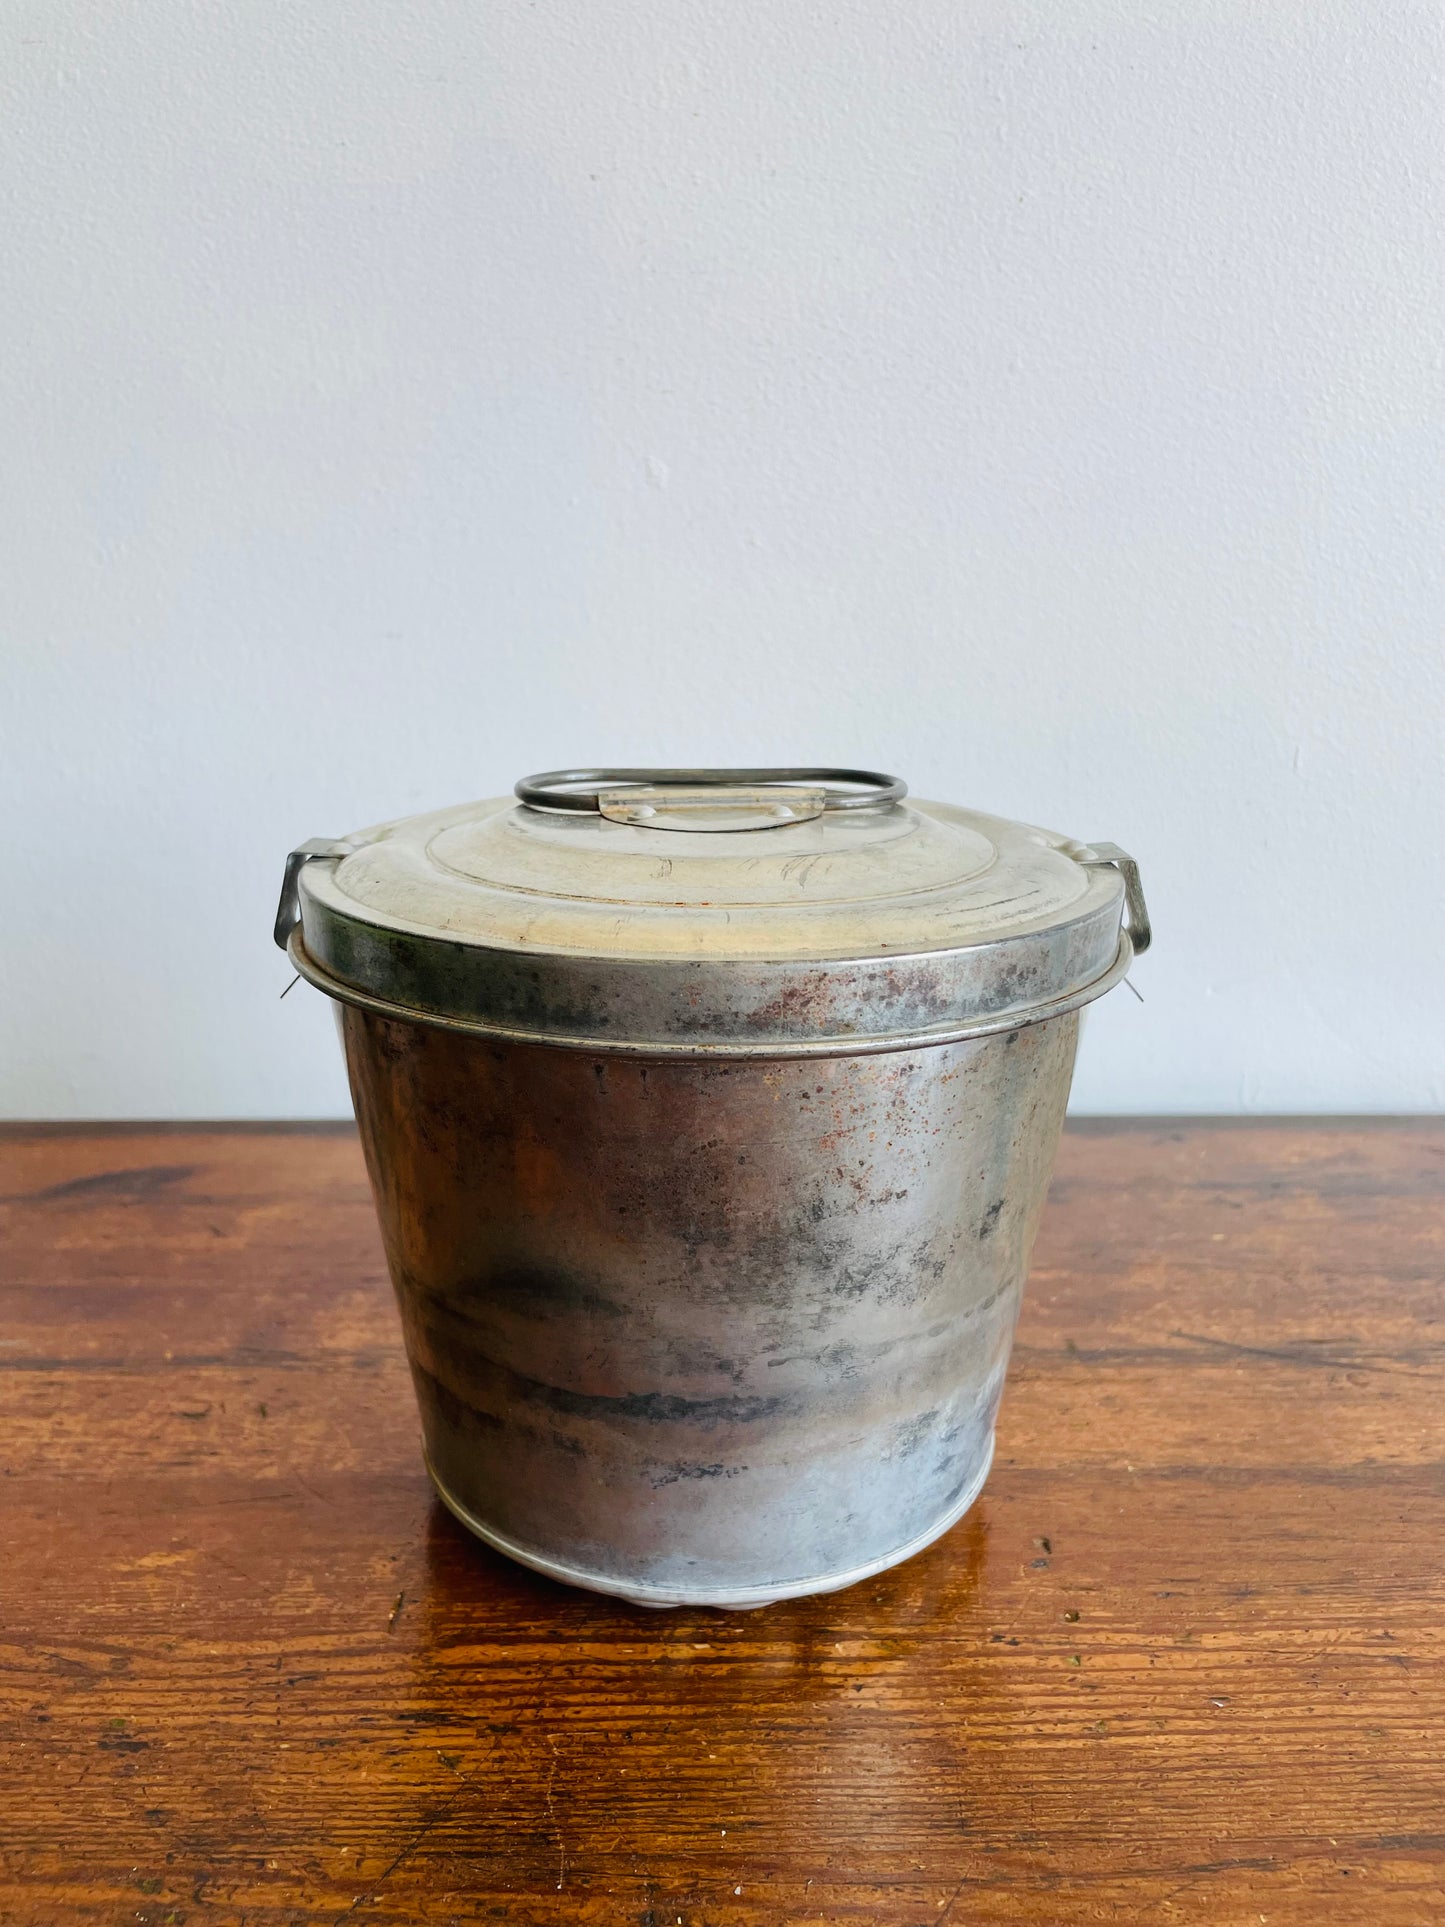 Aluminium Steamed Pudding Mold with Handle & Lid - Made in West Germany - Also Makes a Great Container or Kitchen Compost Holder!